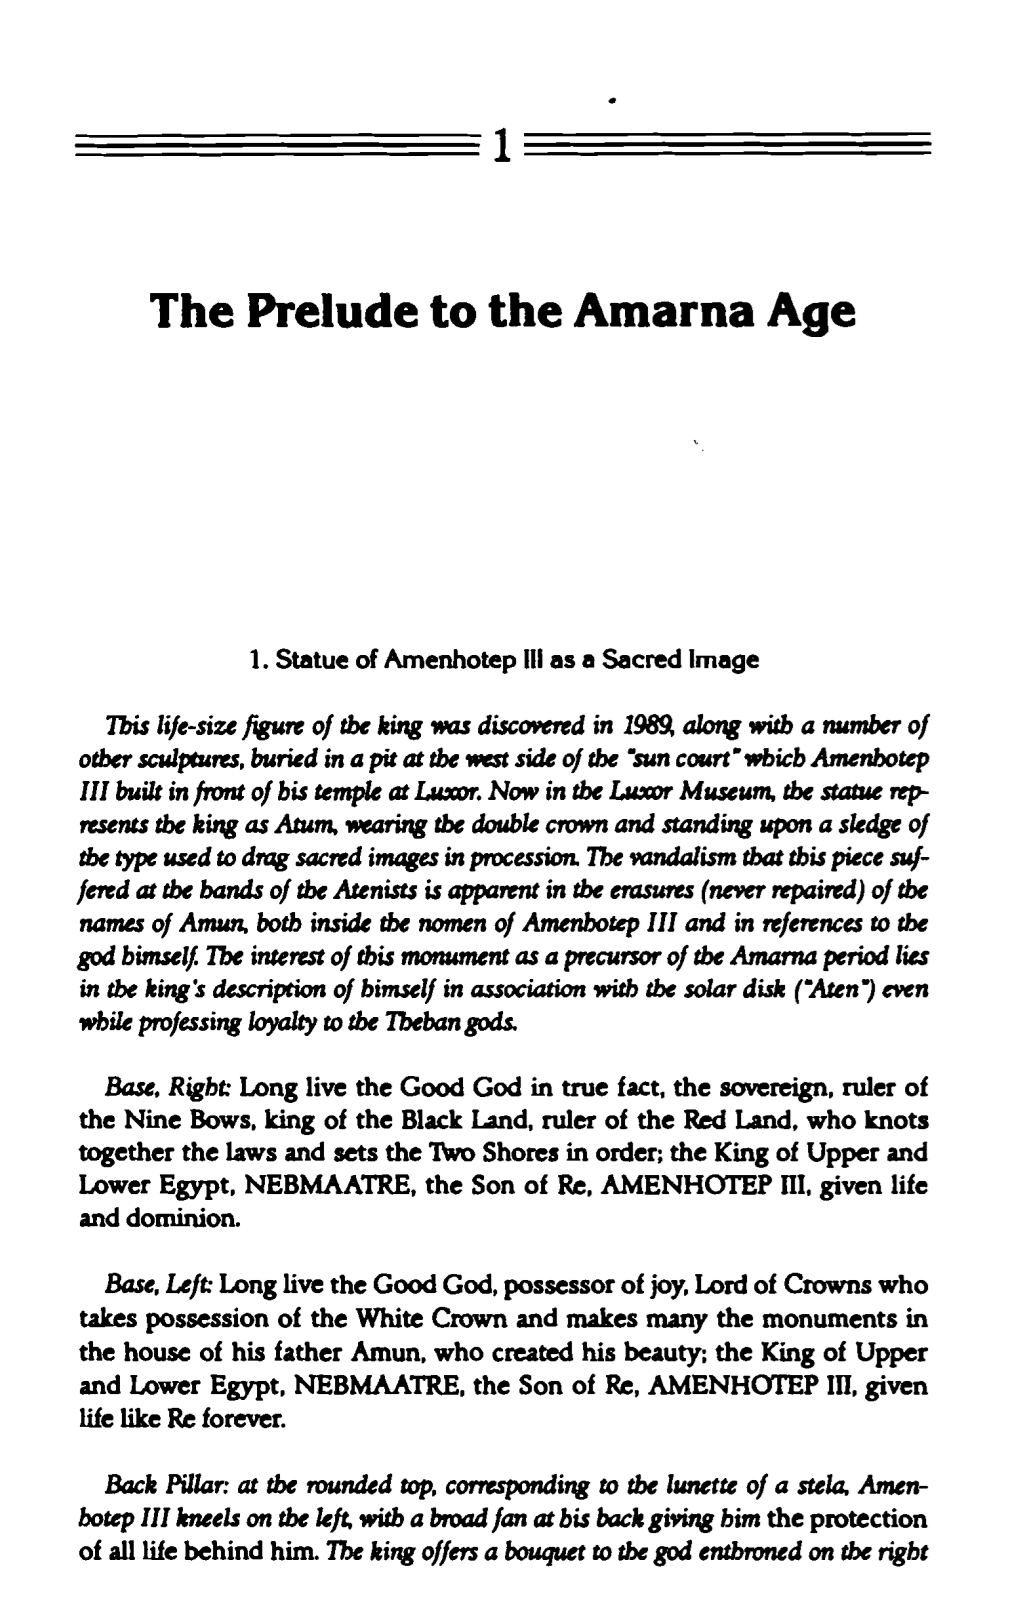 The Prelude to the Amarna Age